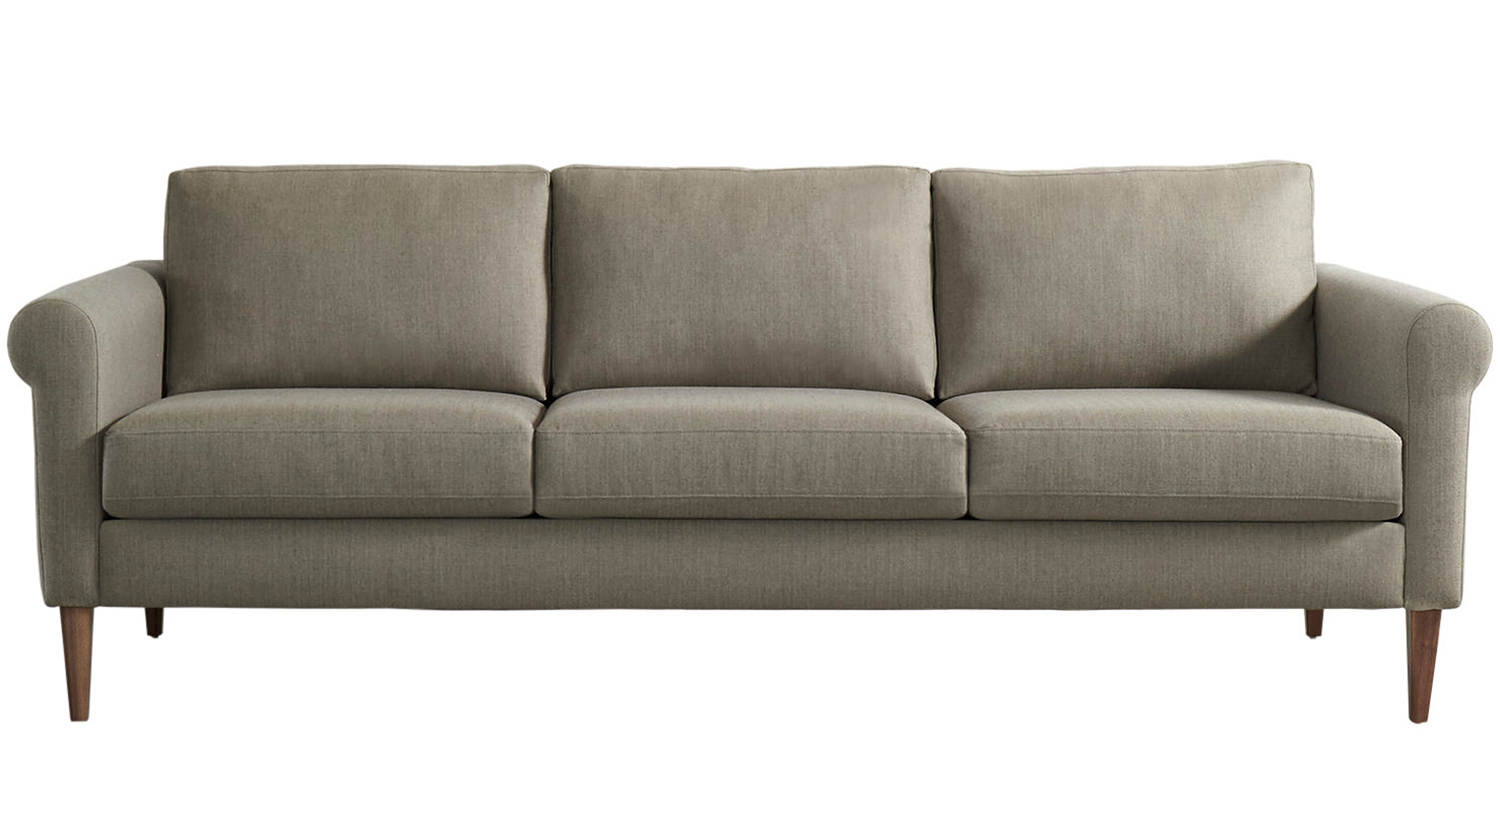 Circle Furniture - Personalize Collection Sofa with Rolled Arm | Circle  Furniture